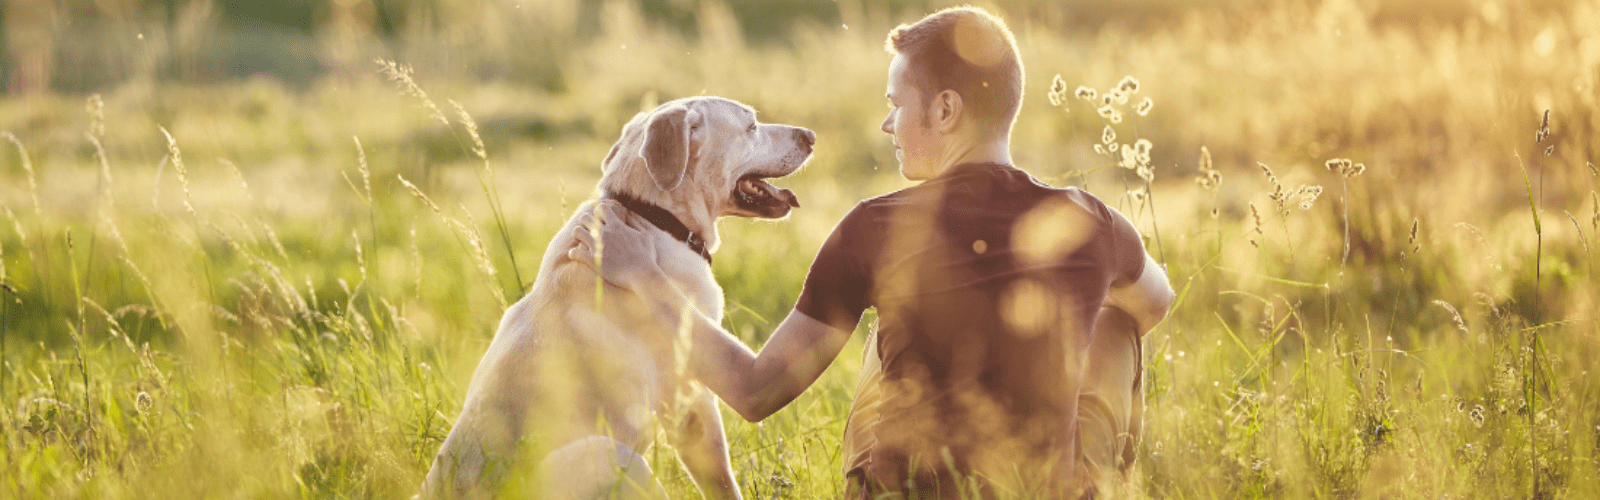 A cream-coloured dog sat next to a man in a field